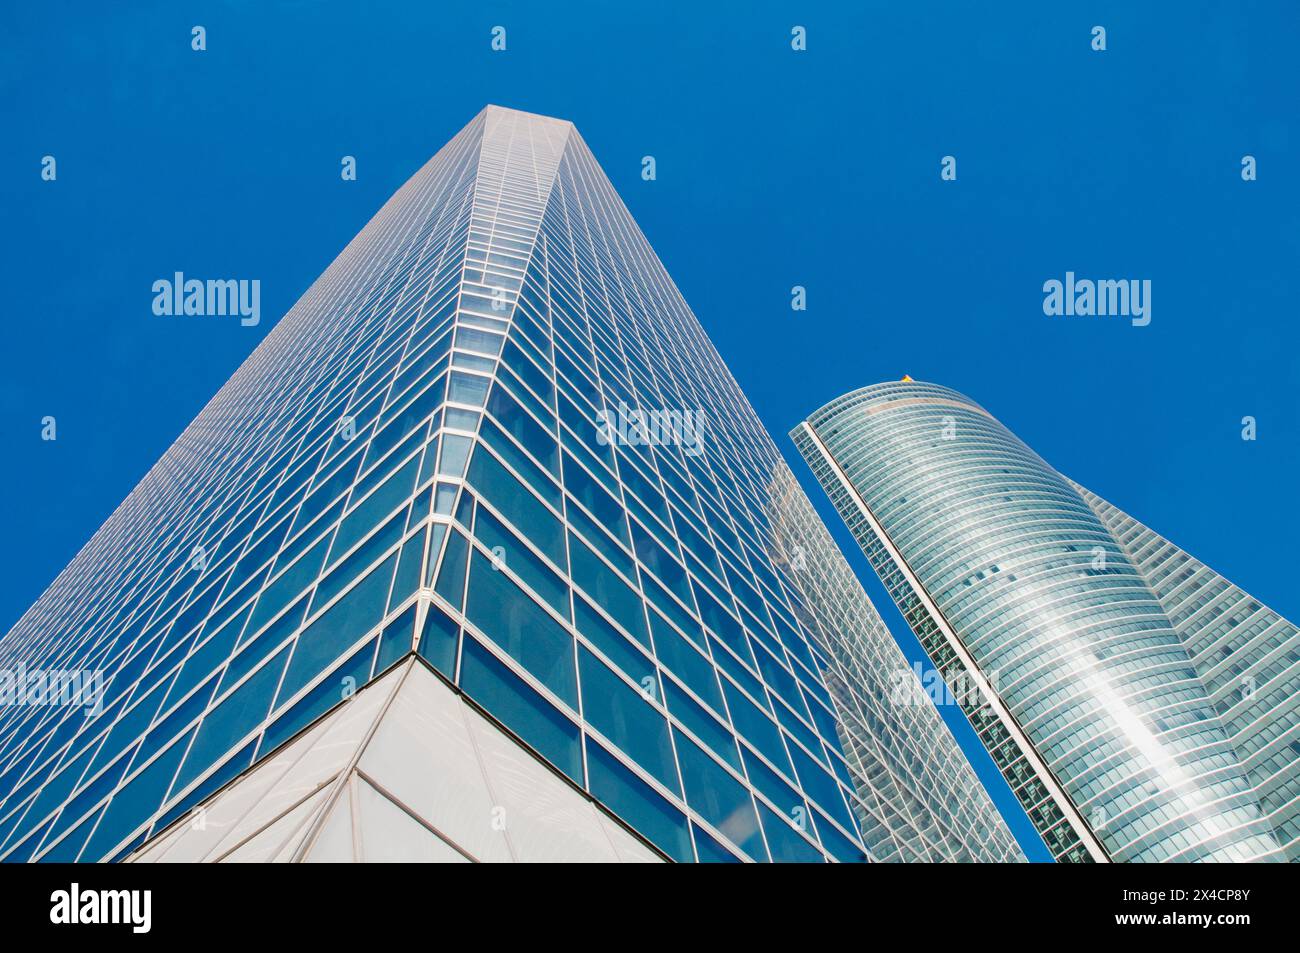 Cristal Tower and Espacio Tower, view from below. Madrid, Spain. Stock Photo